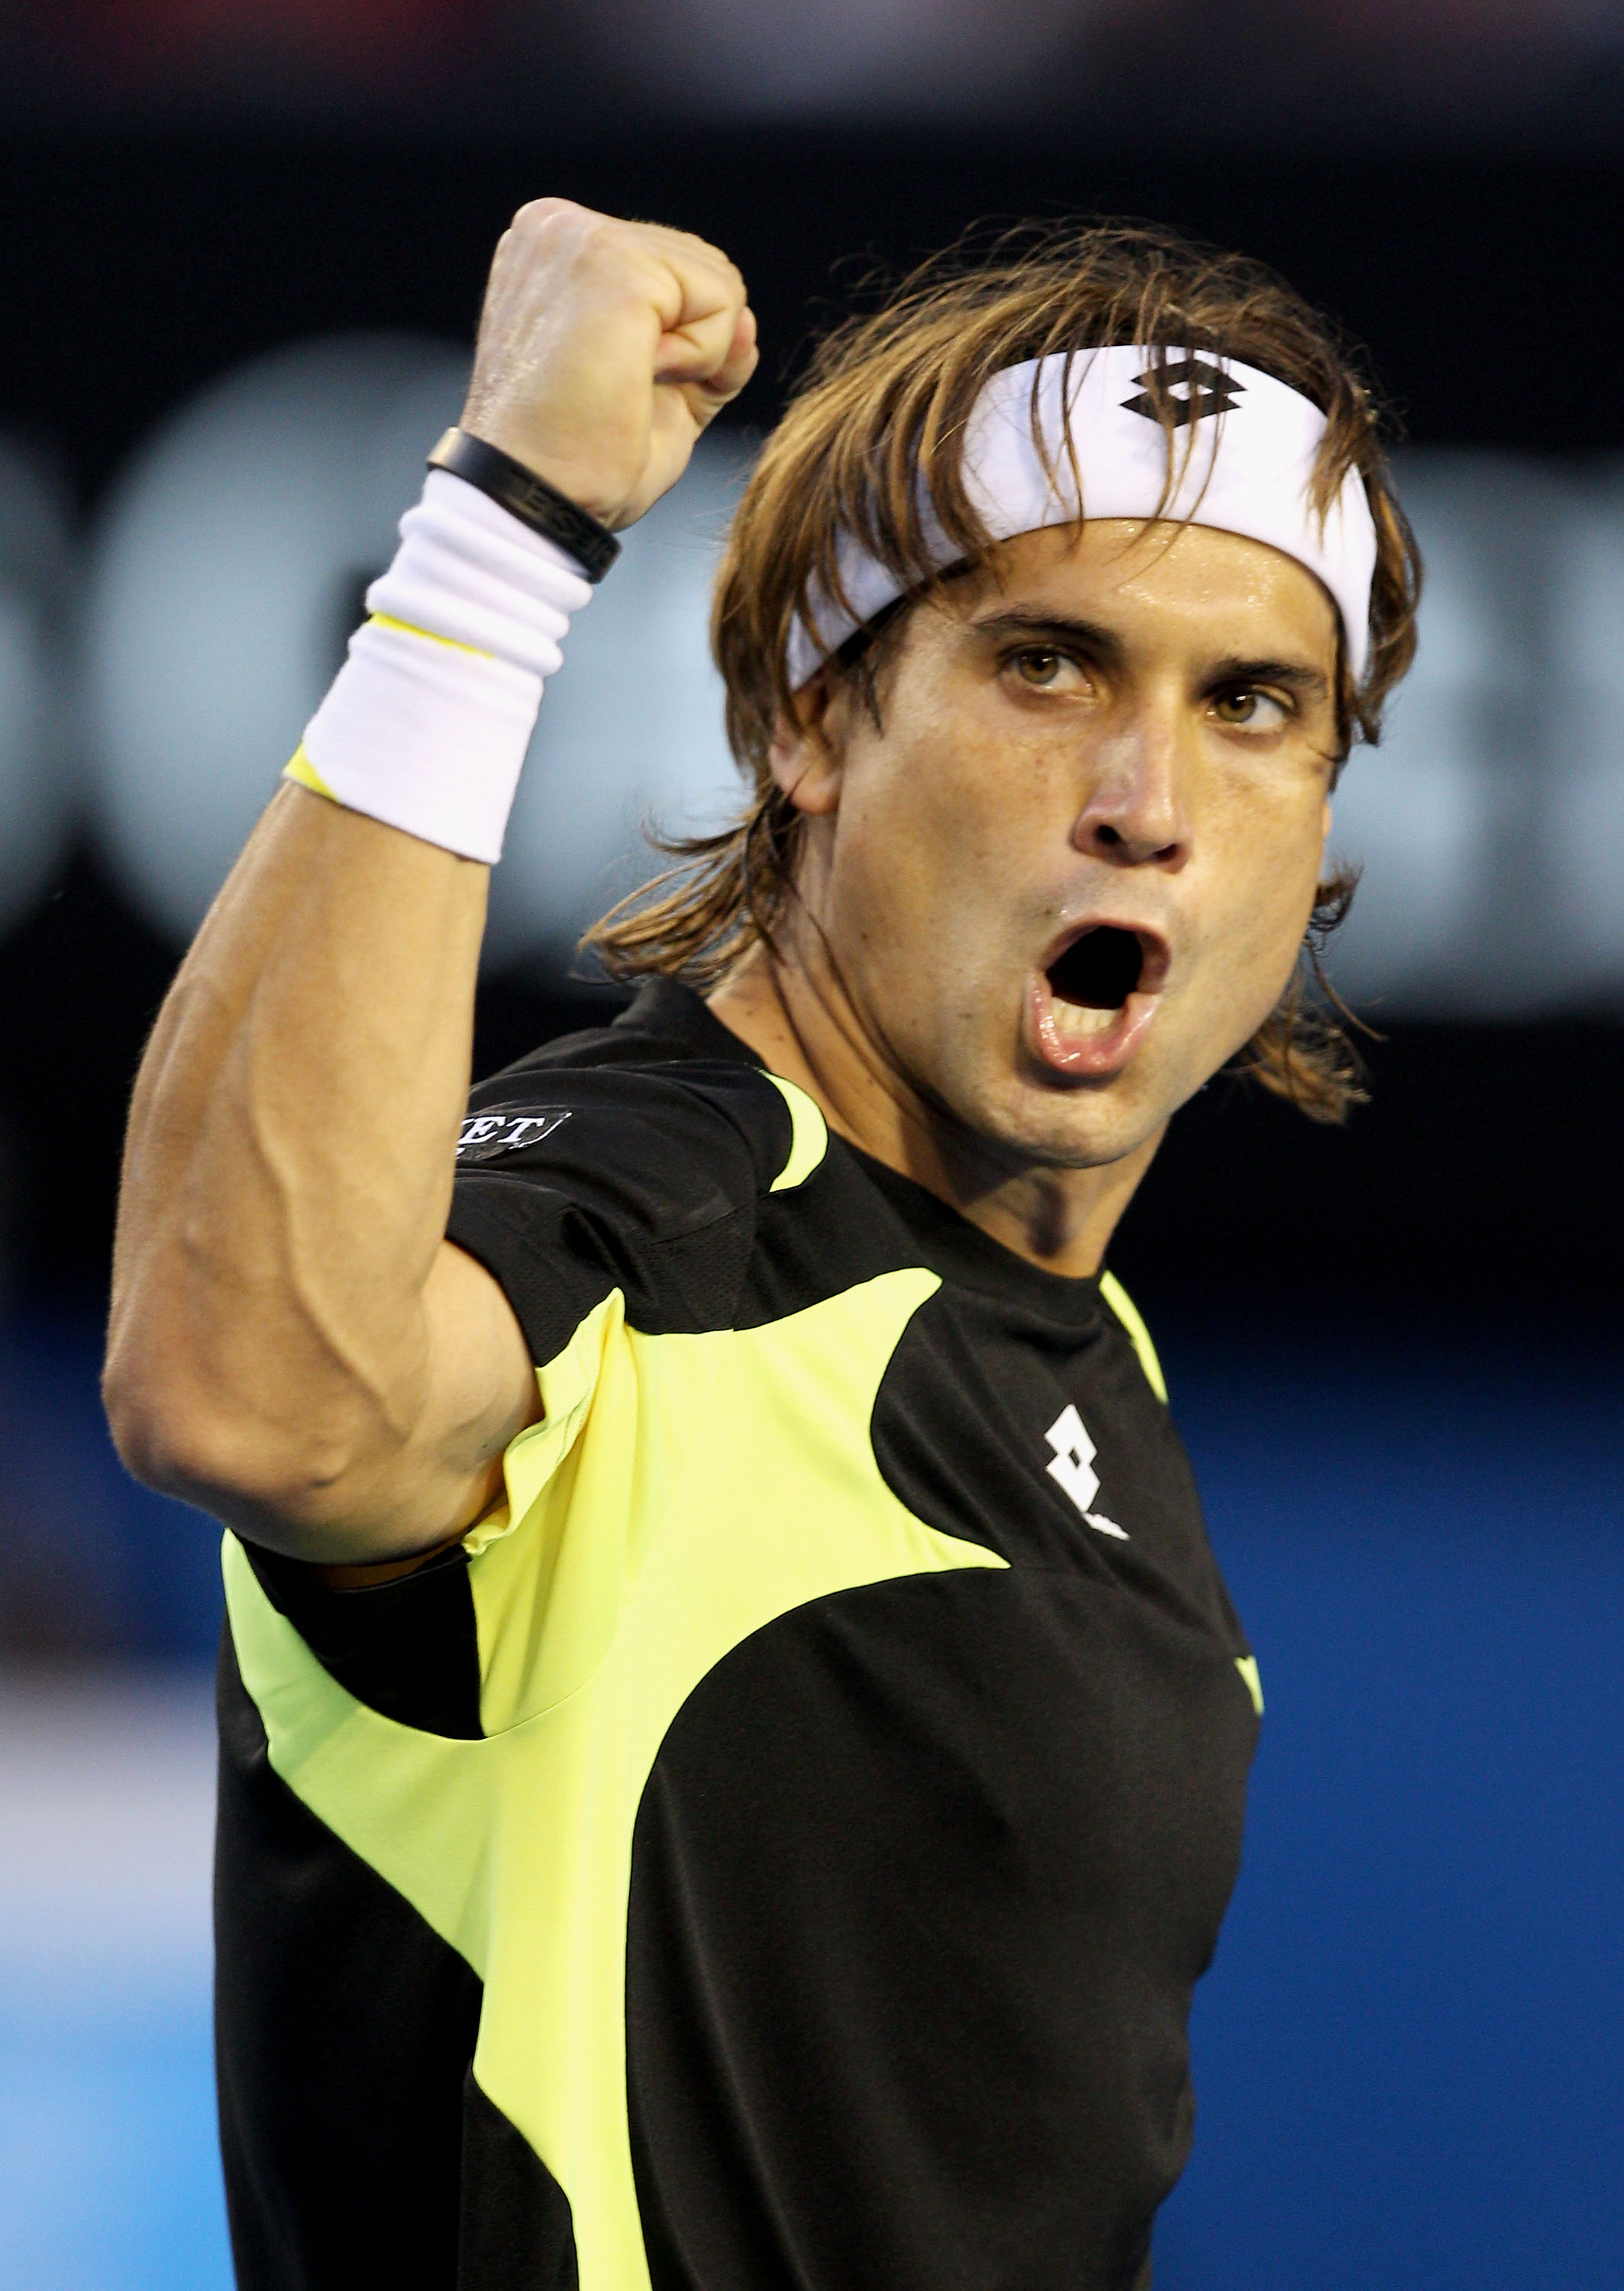 MELBOURNE, AUSTRALIA - JANUARY 28:  David Ferrer of Spain celebrates winninga point in his semifinal match against Andy Murray of Great Britain during day twelve of the 2011 Australian Open at Melbourne Park on January 28, 2011 in Melbourne, Australia.  (